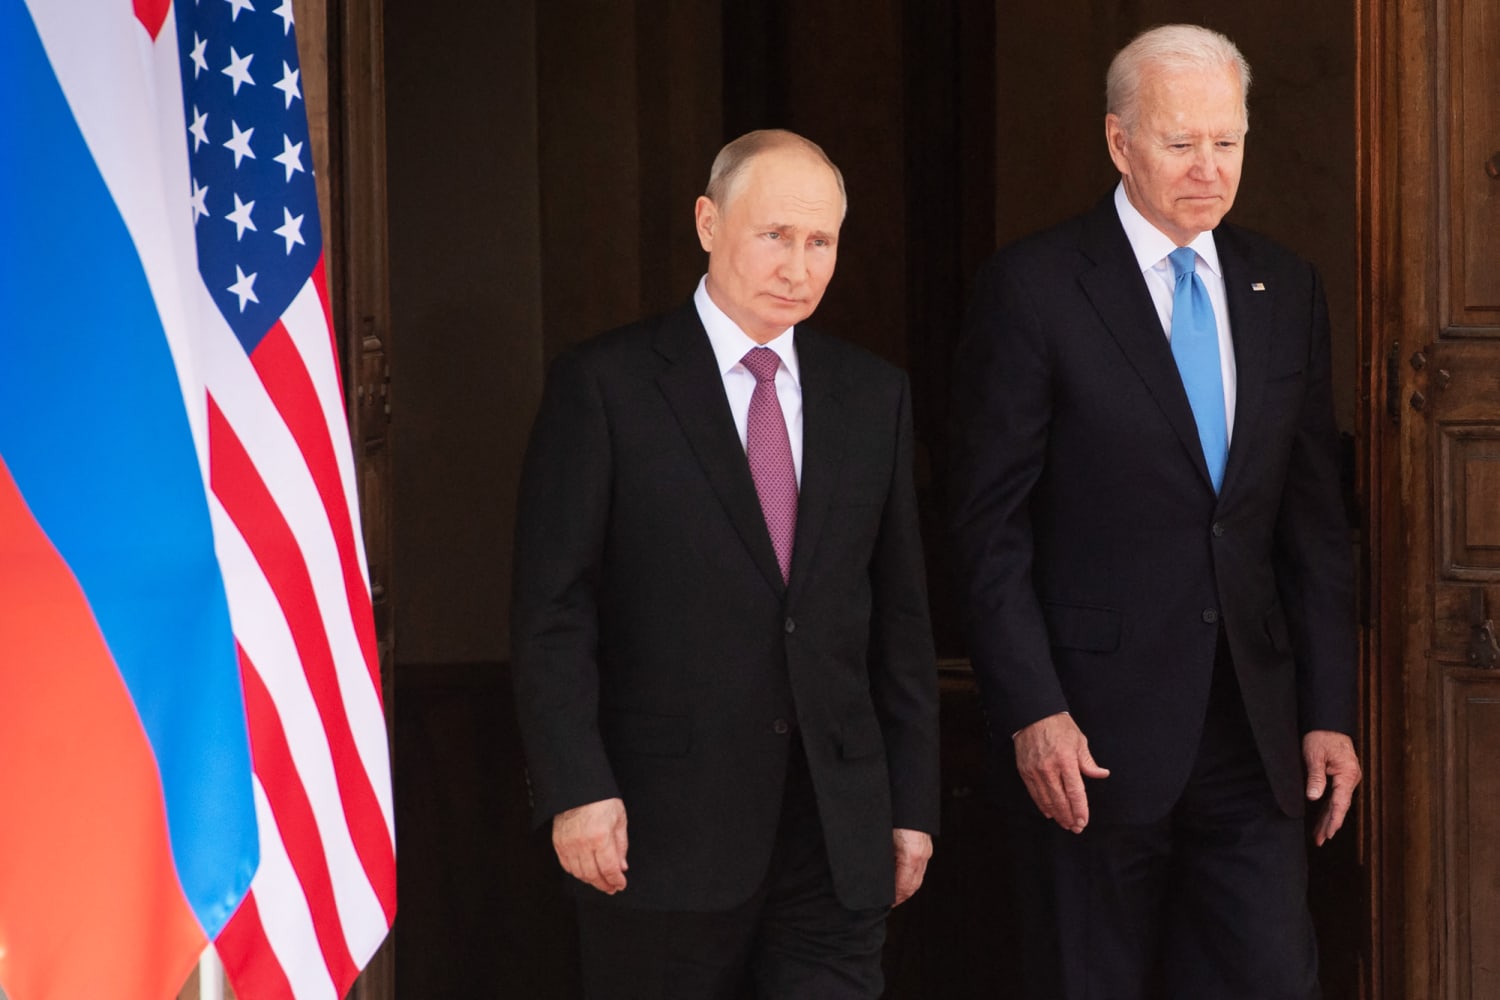 Biden to warn Putin of ‘very real costs’ should Russia take military action against Ukraine